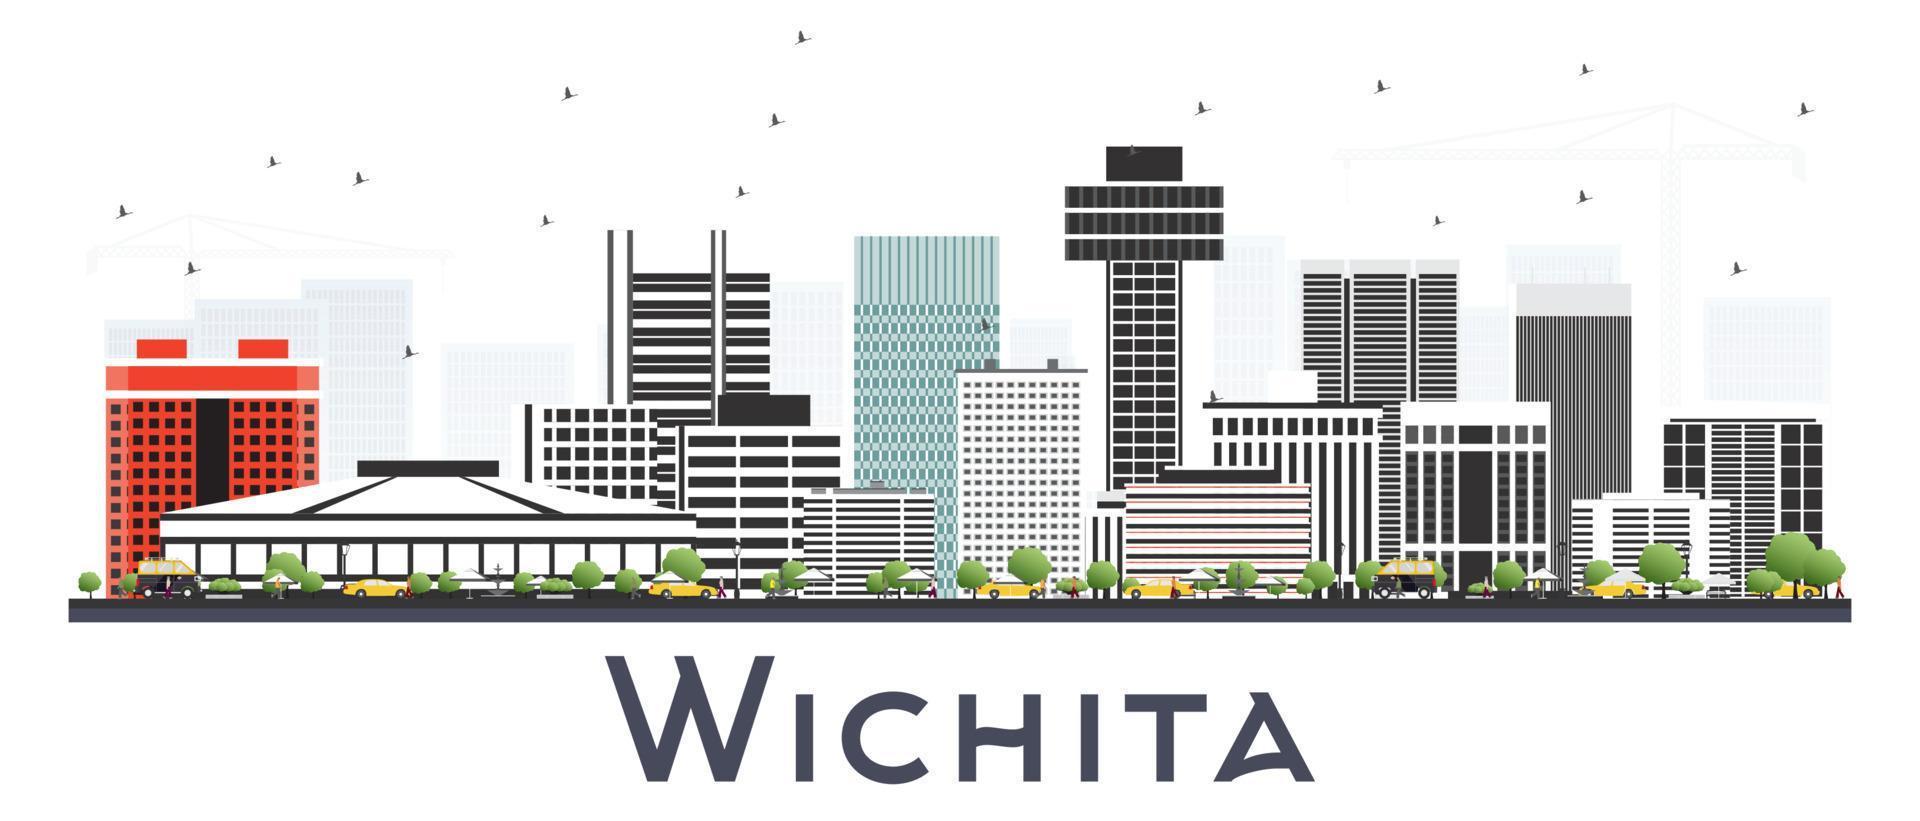 Wichita Kansas City Skyline with Gray Buildings Isolated on White. vector